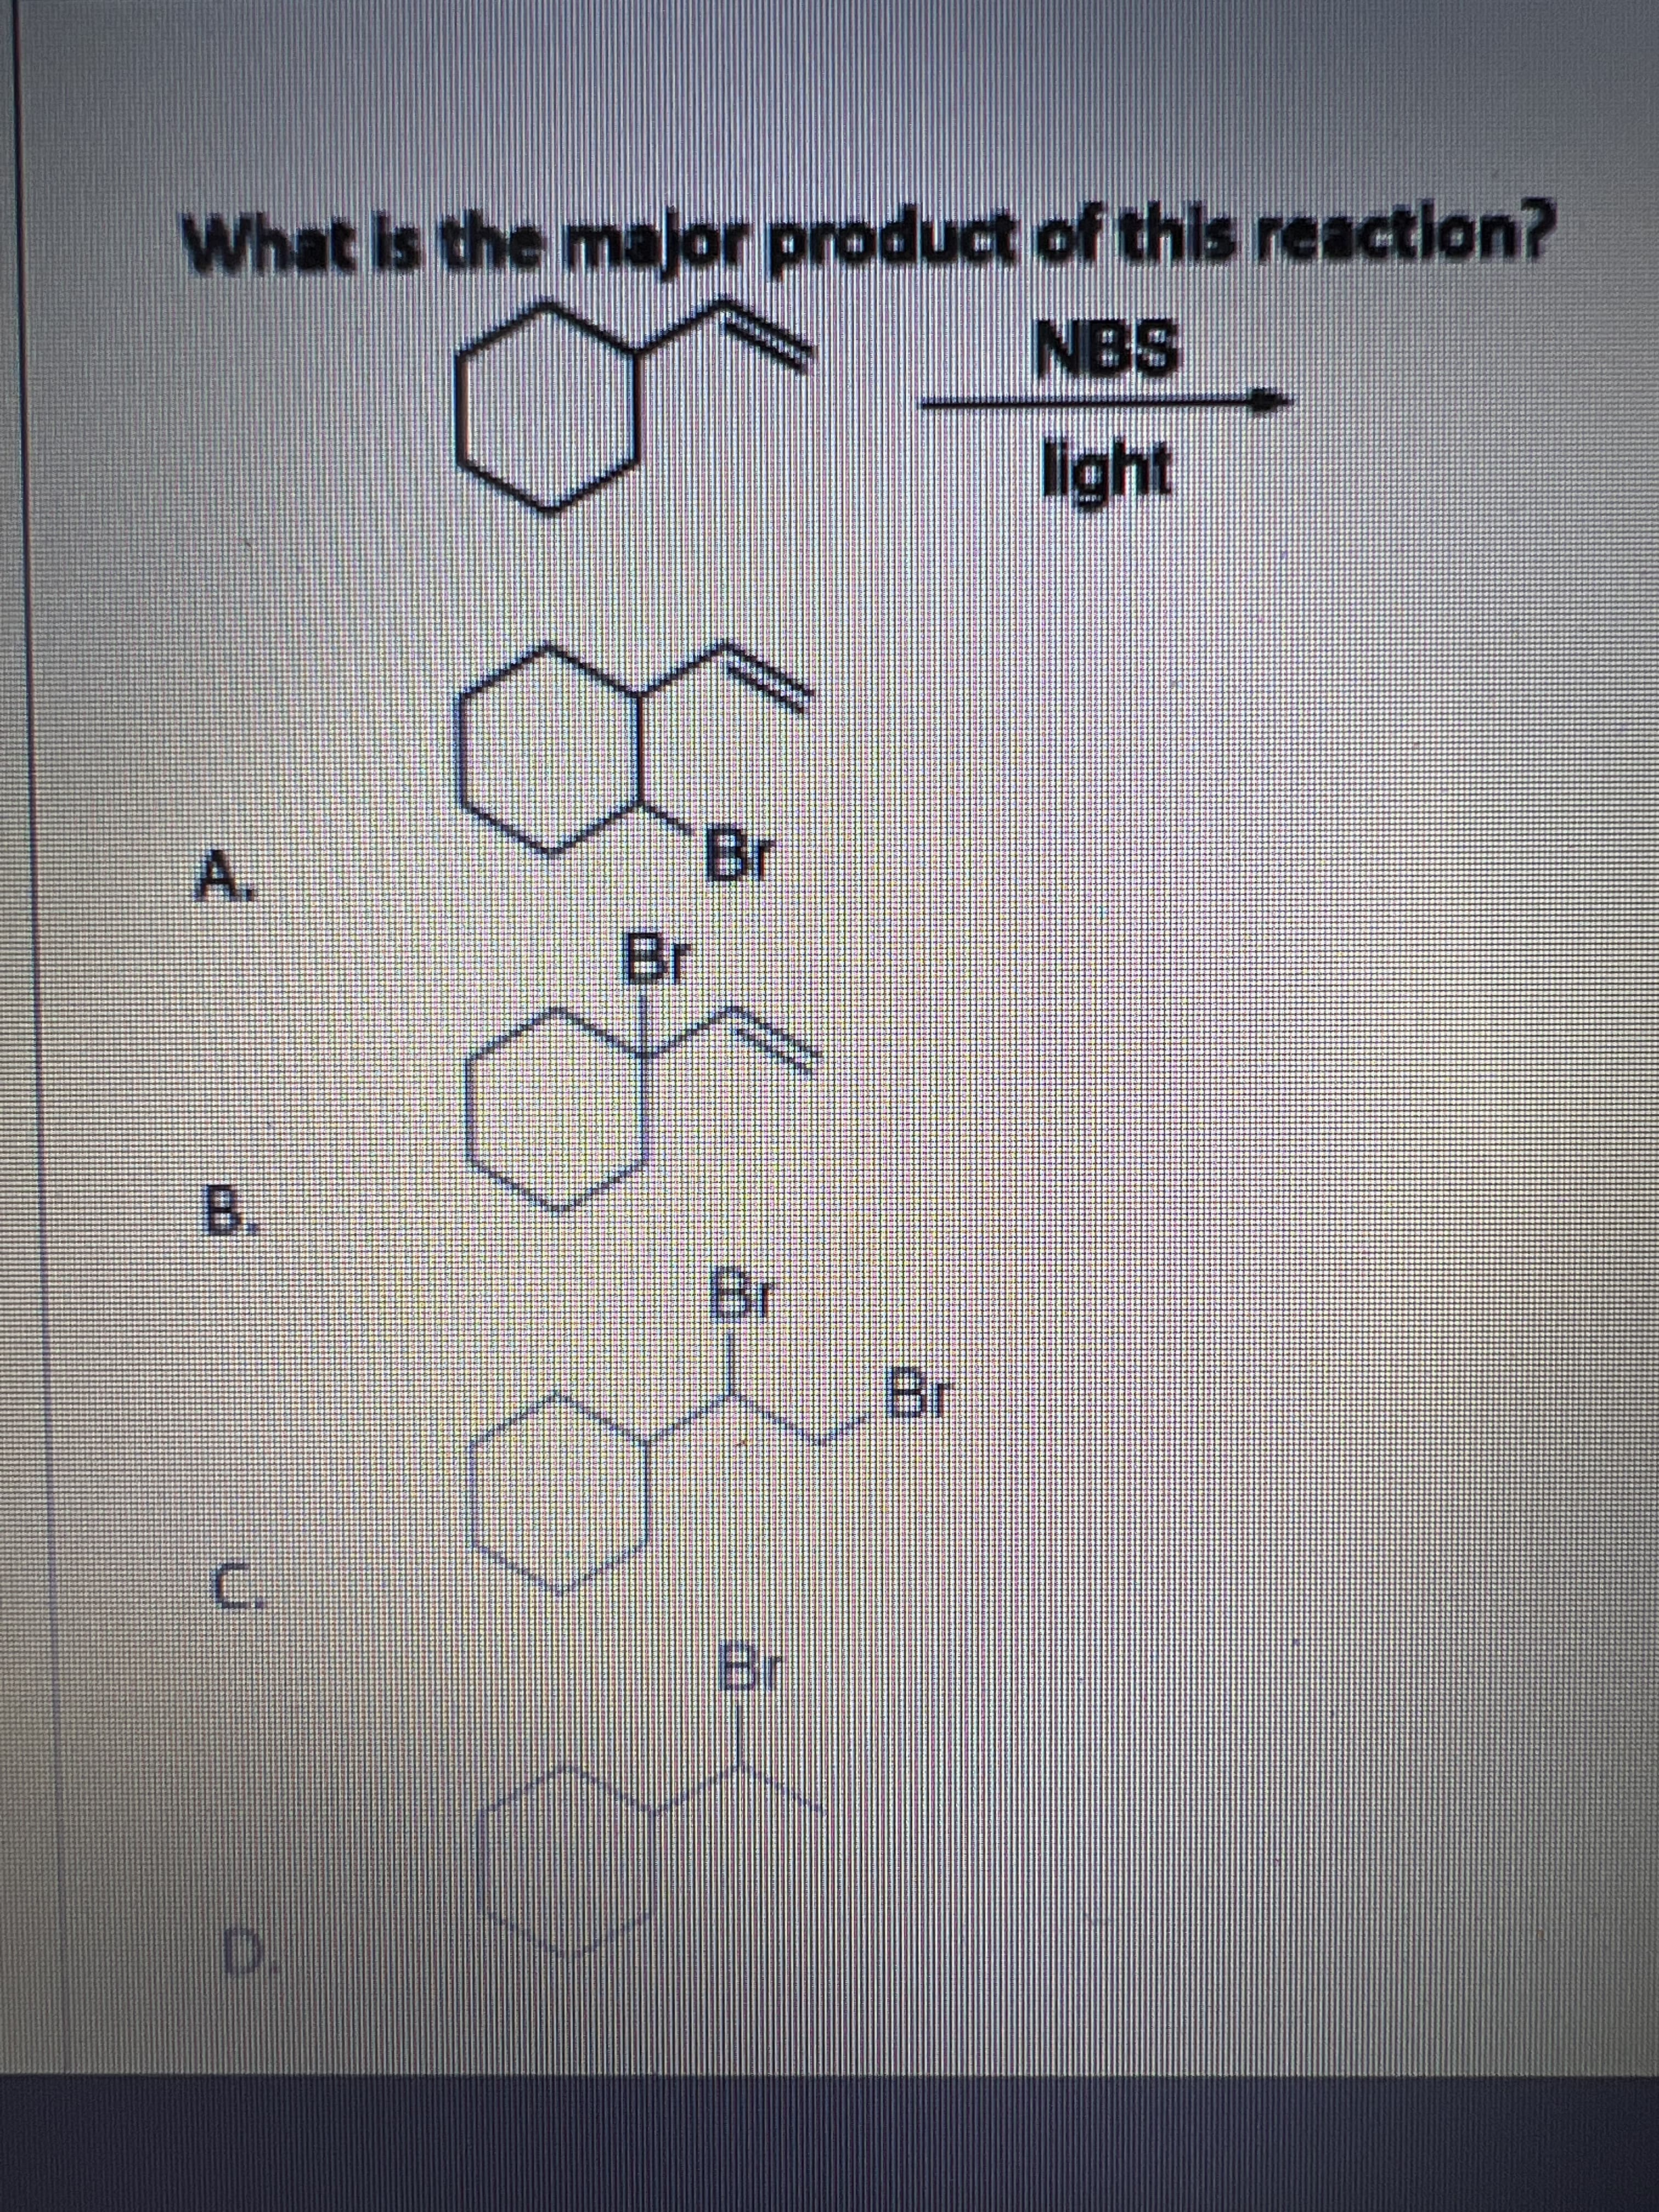 Bn
Br
Br
C.
Br
Br
B.
light
What is the major product of this reaction?
